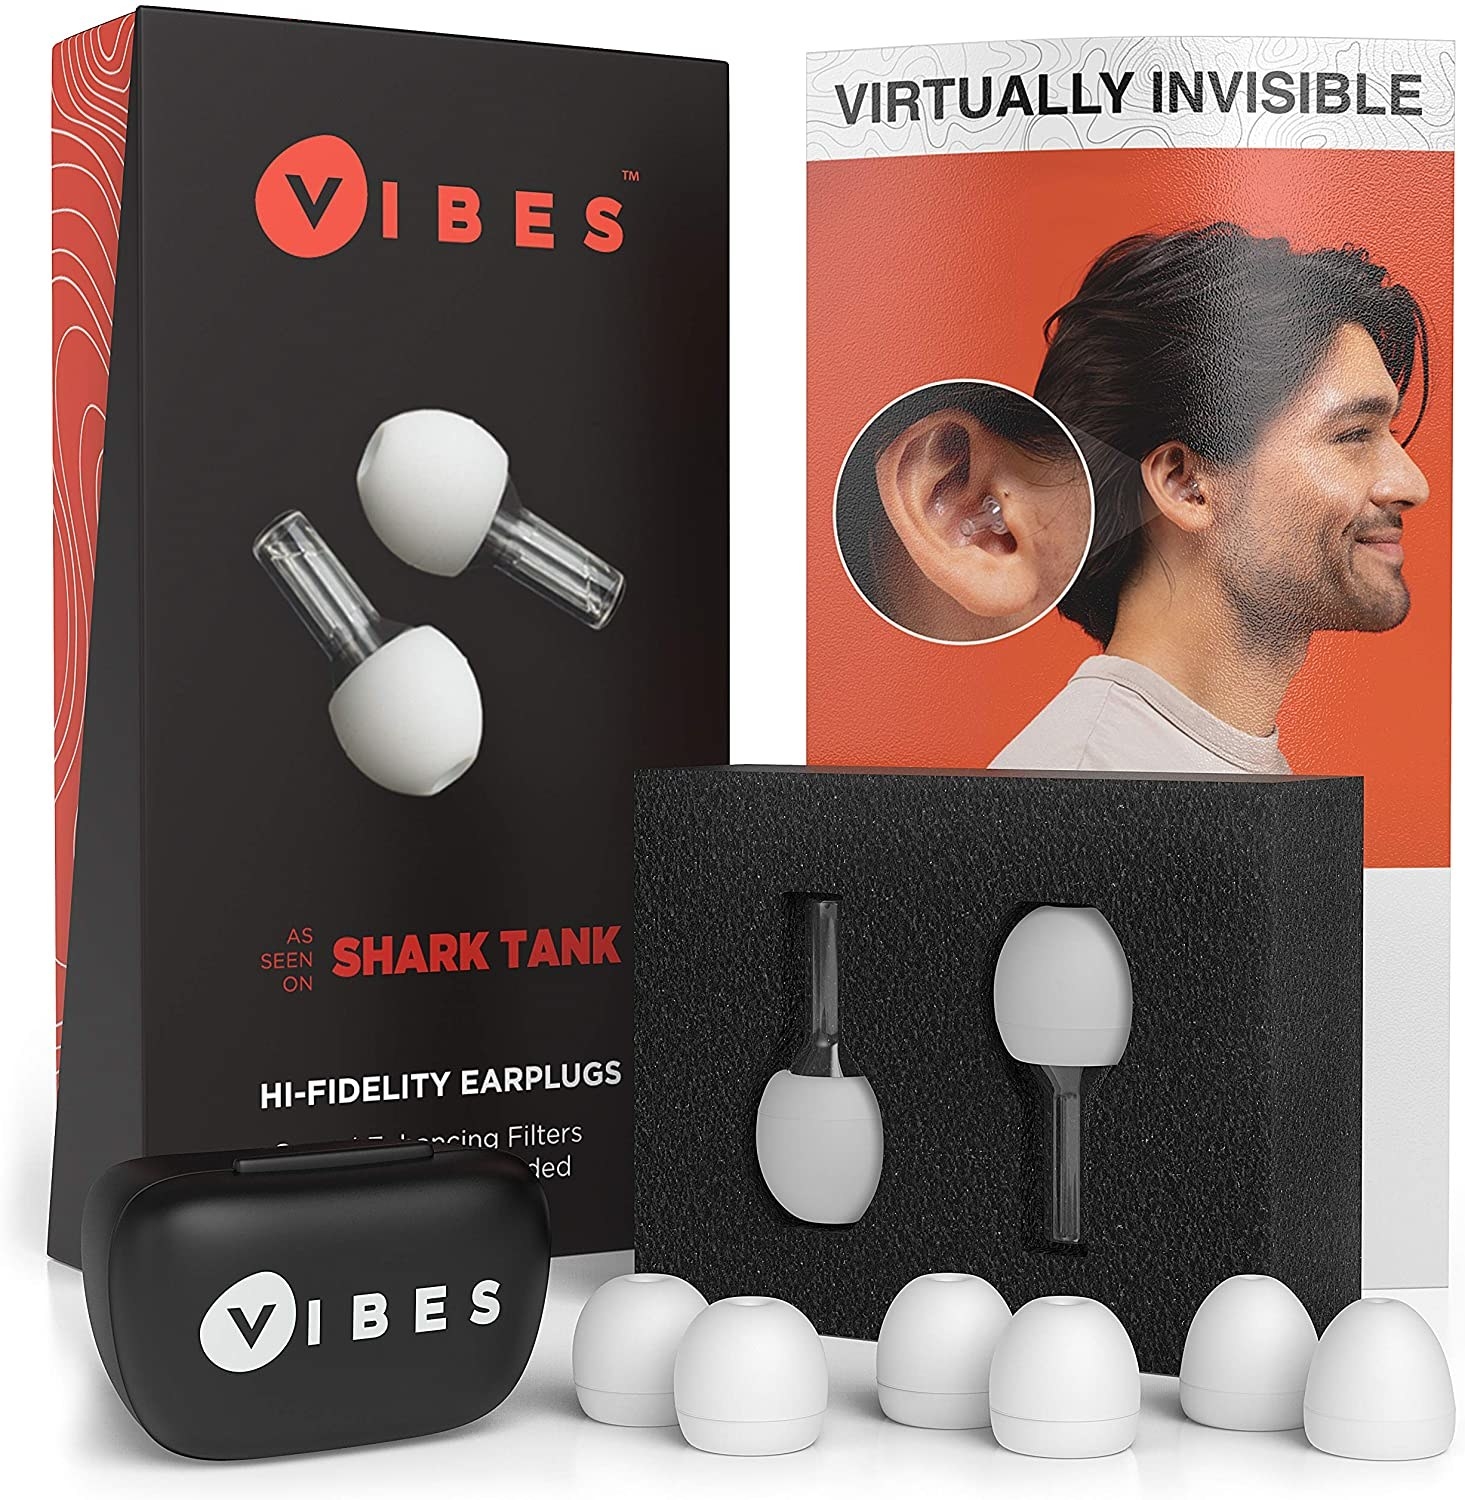 The full ear plugs set and the box it comes in